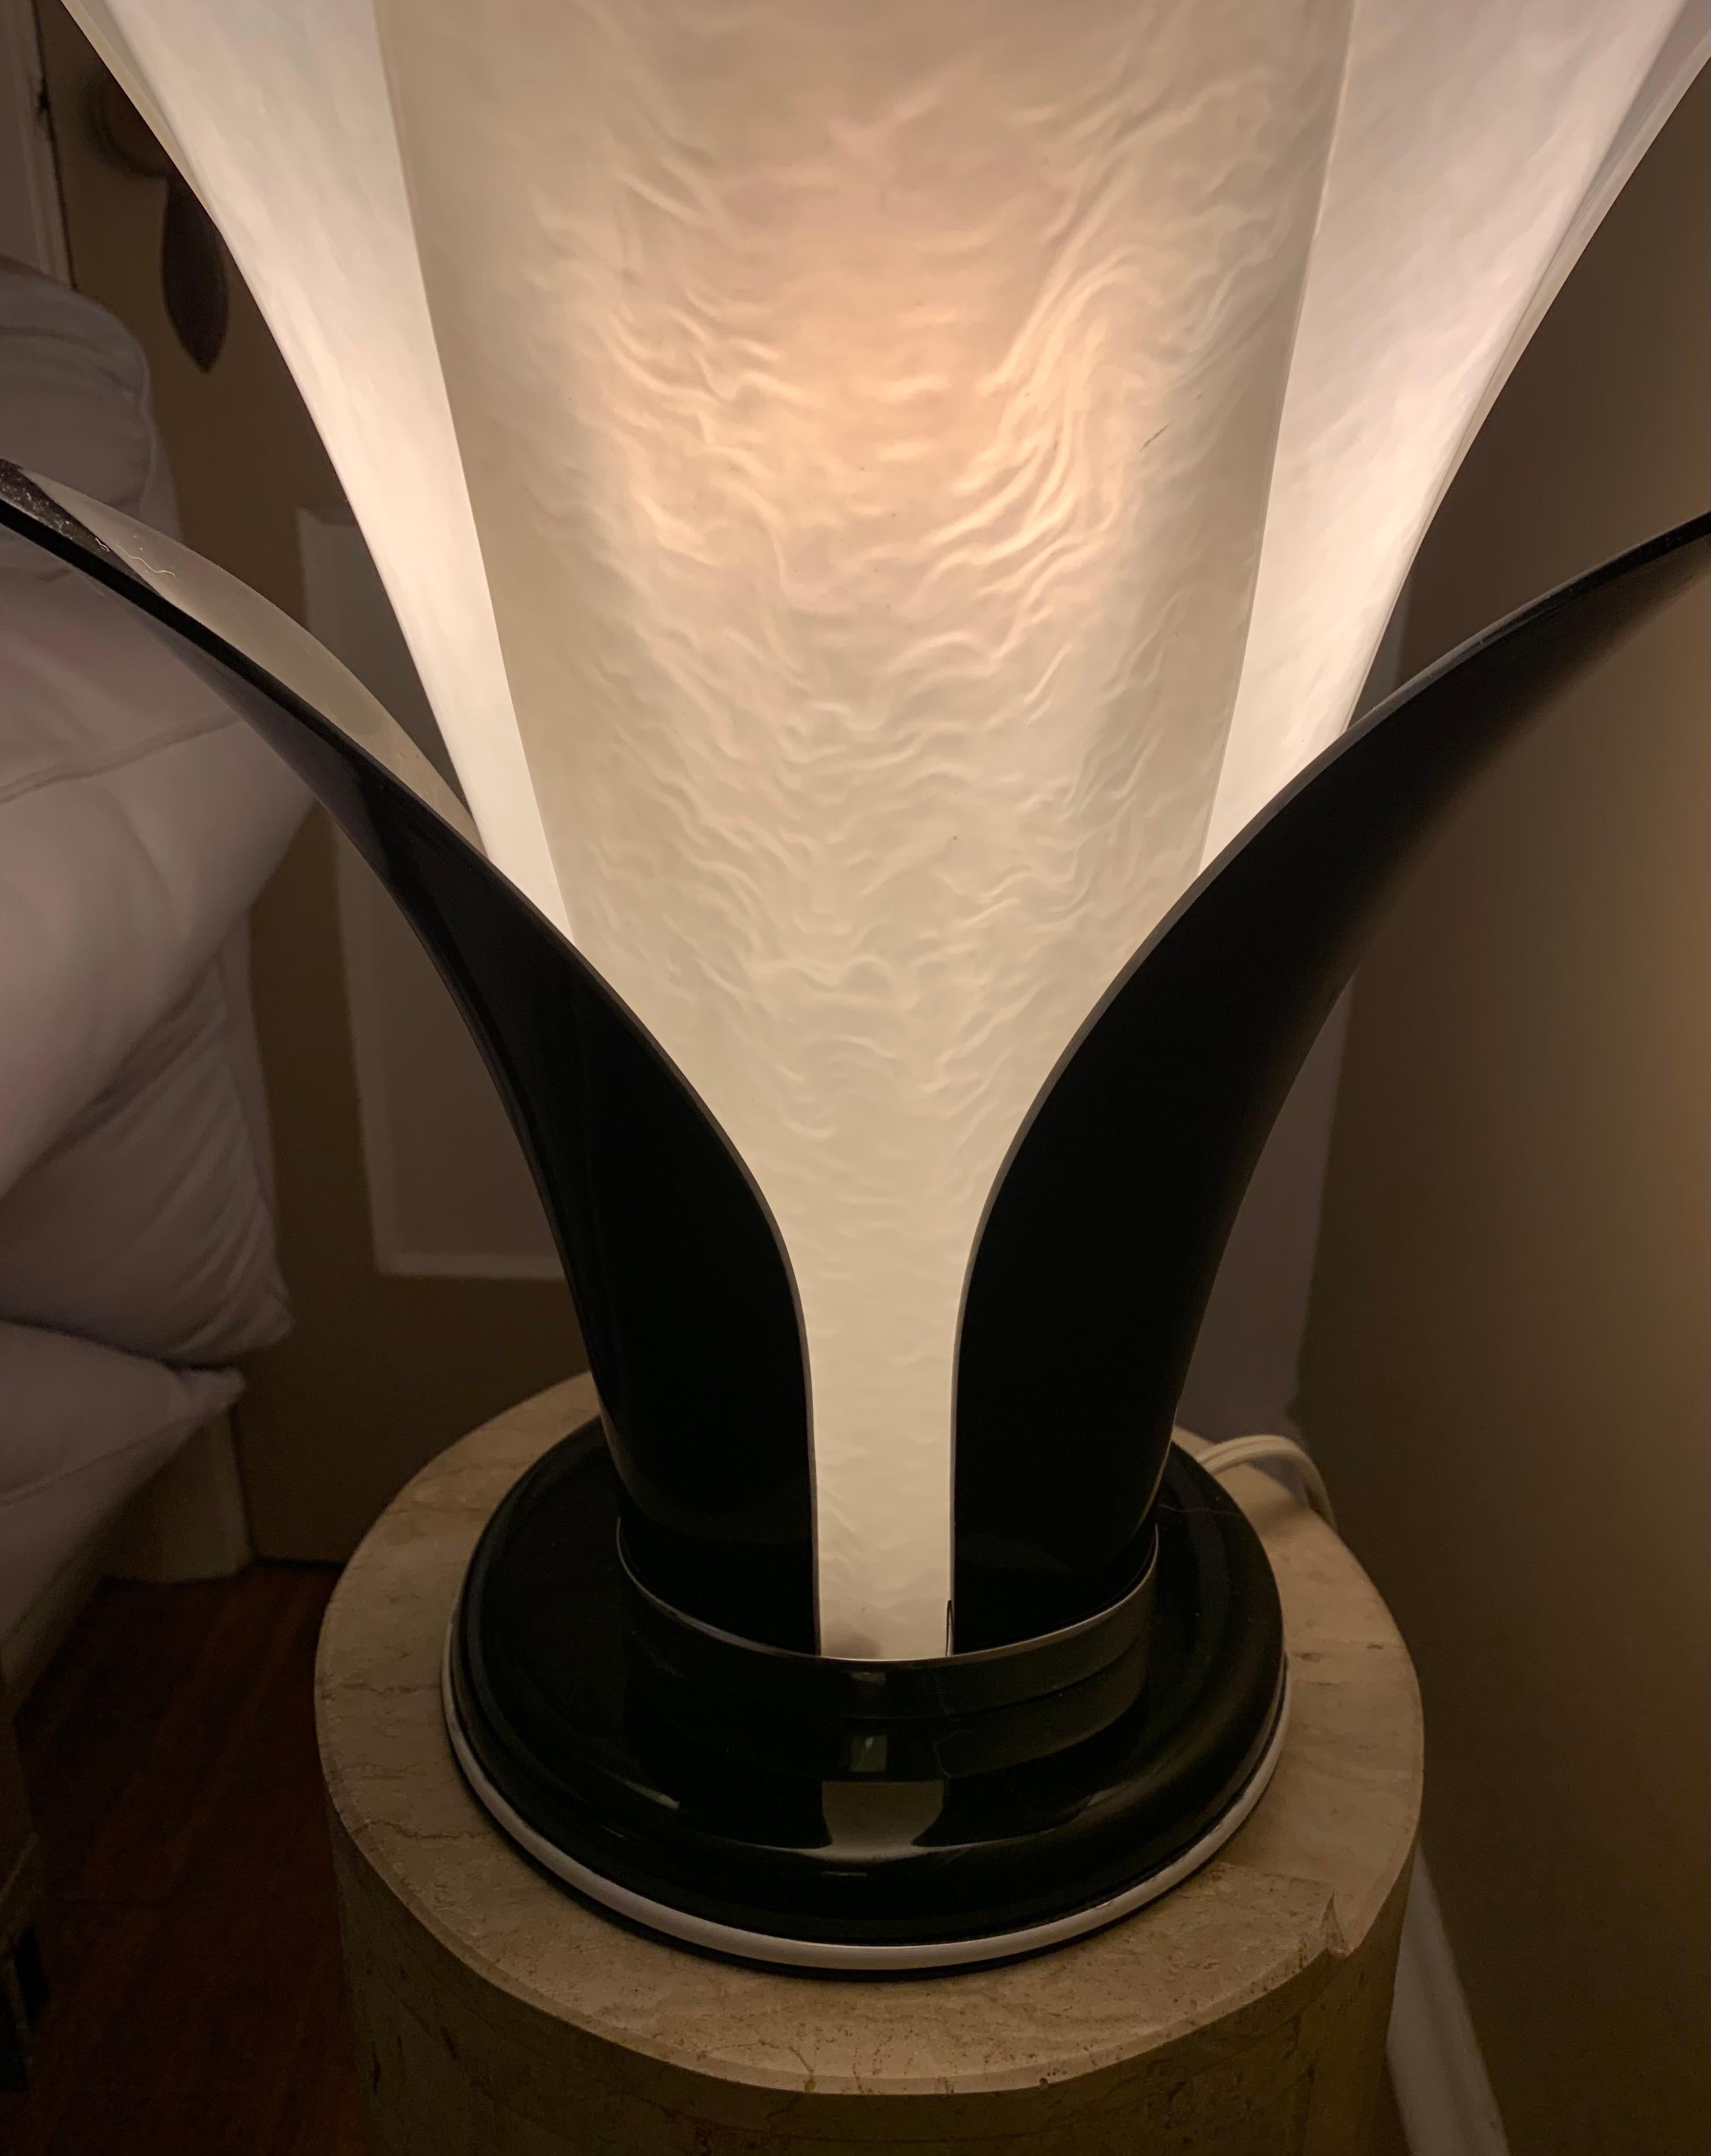 This decorative table lamp inspired by a tulip was made by Rougier in the 1970s. 

The leaves are made of PMMA opaline, a hard plastic.

This decorative table lamp is in very good vintage condition with no flaws to note. 

Looks just lovely